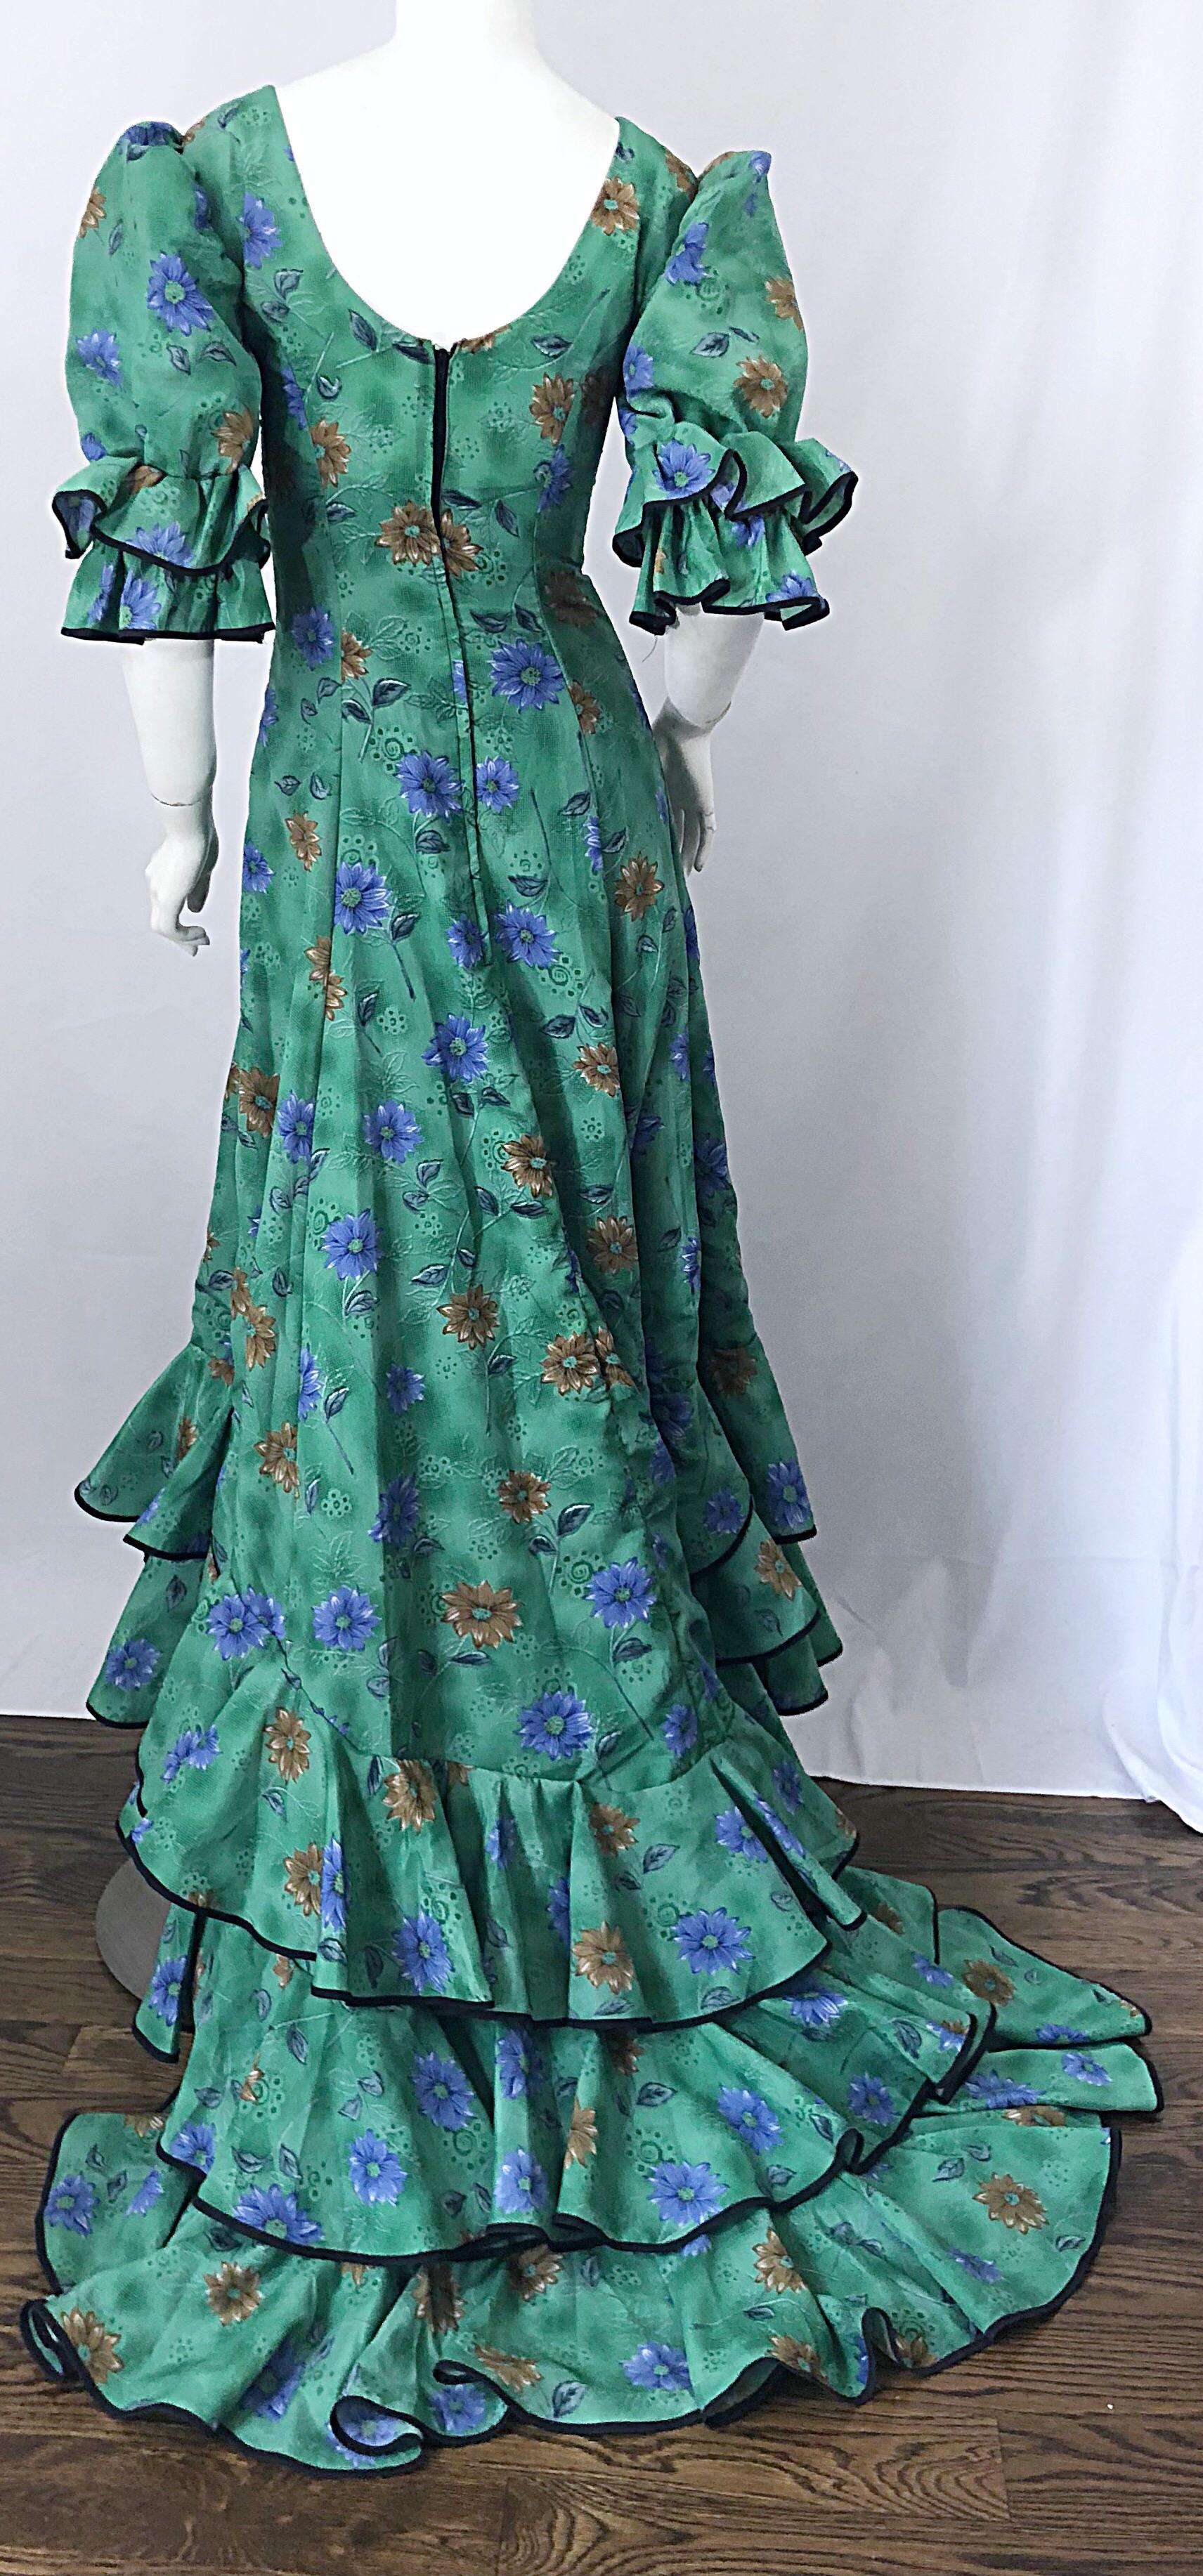 Amazing Vintage Victorian Inspired 1970s Does 1800s Steampunk Green Trained Gown For Sale 1